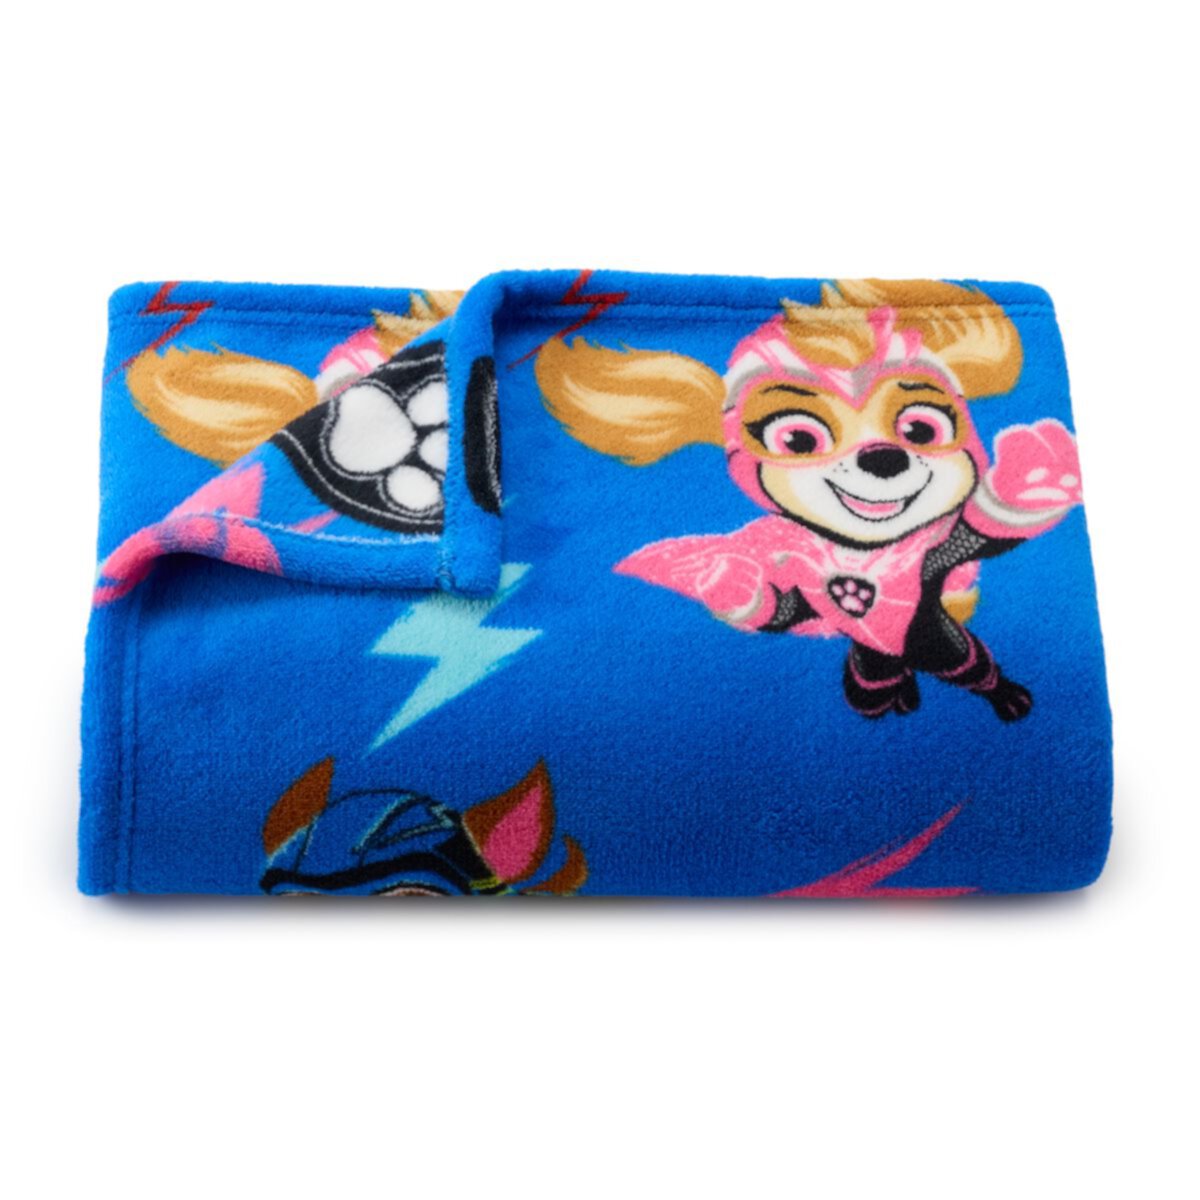 Paw Patrol Plush Throw Licensed Character